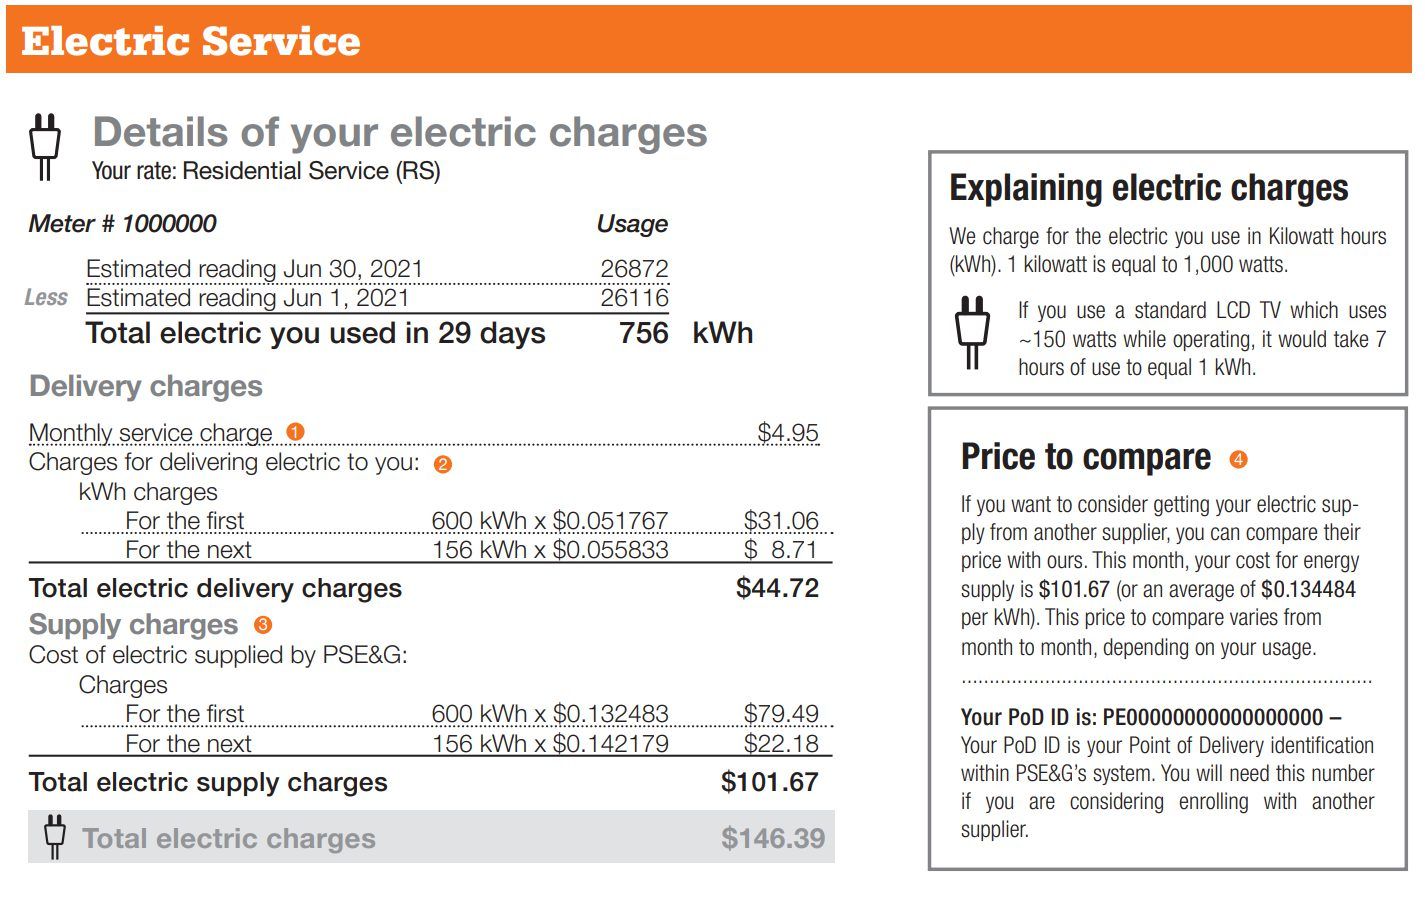 Image shows important information on PSEG electric bill